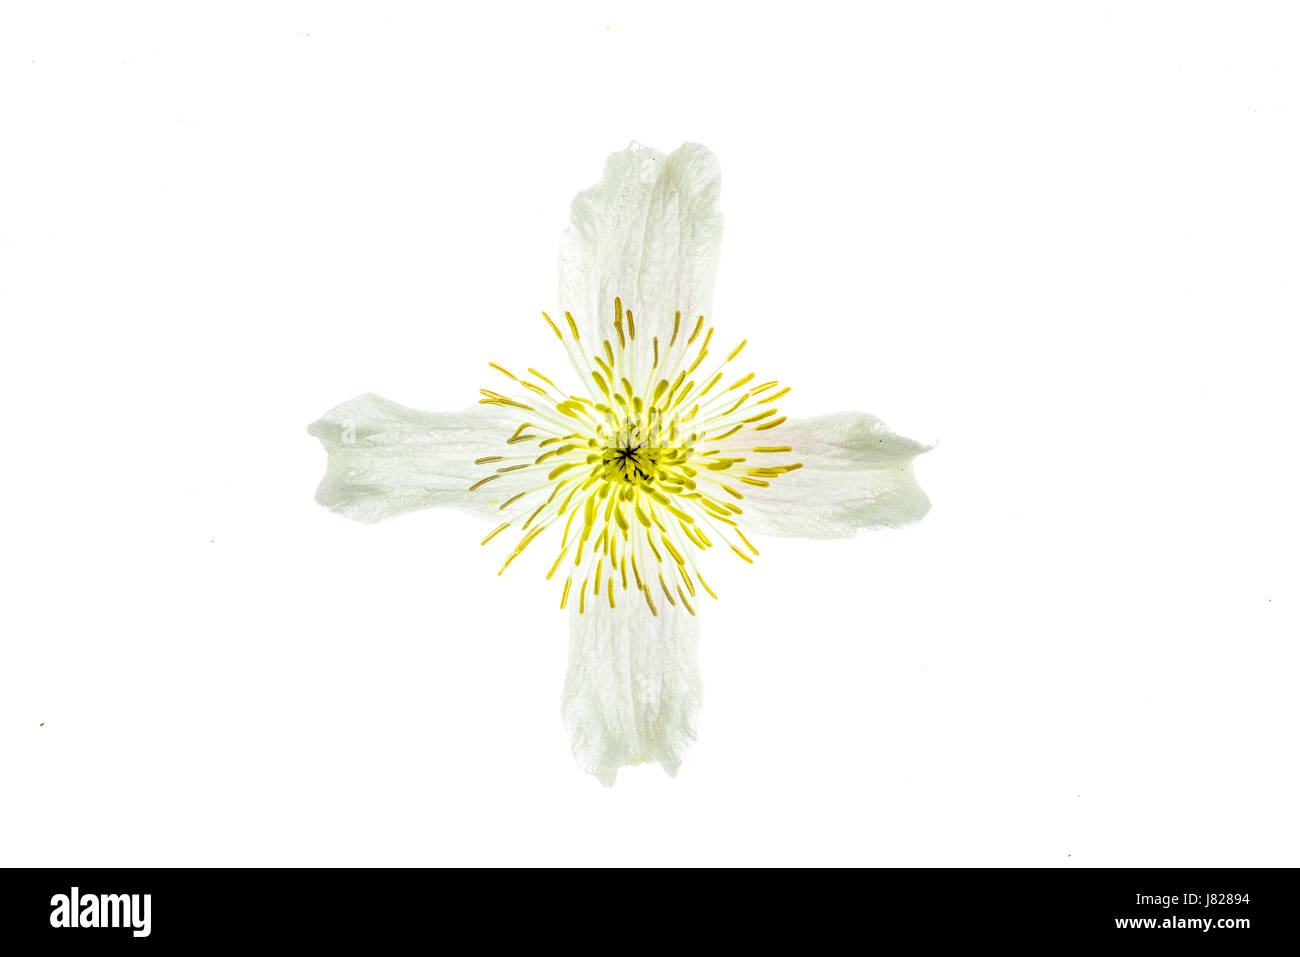 Translucent cross or cruciform shape on the white and yellow bloom of a climbing plant Stock Photo